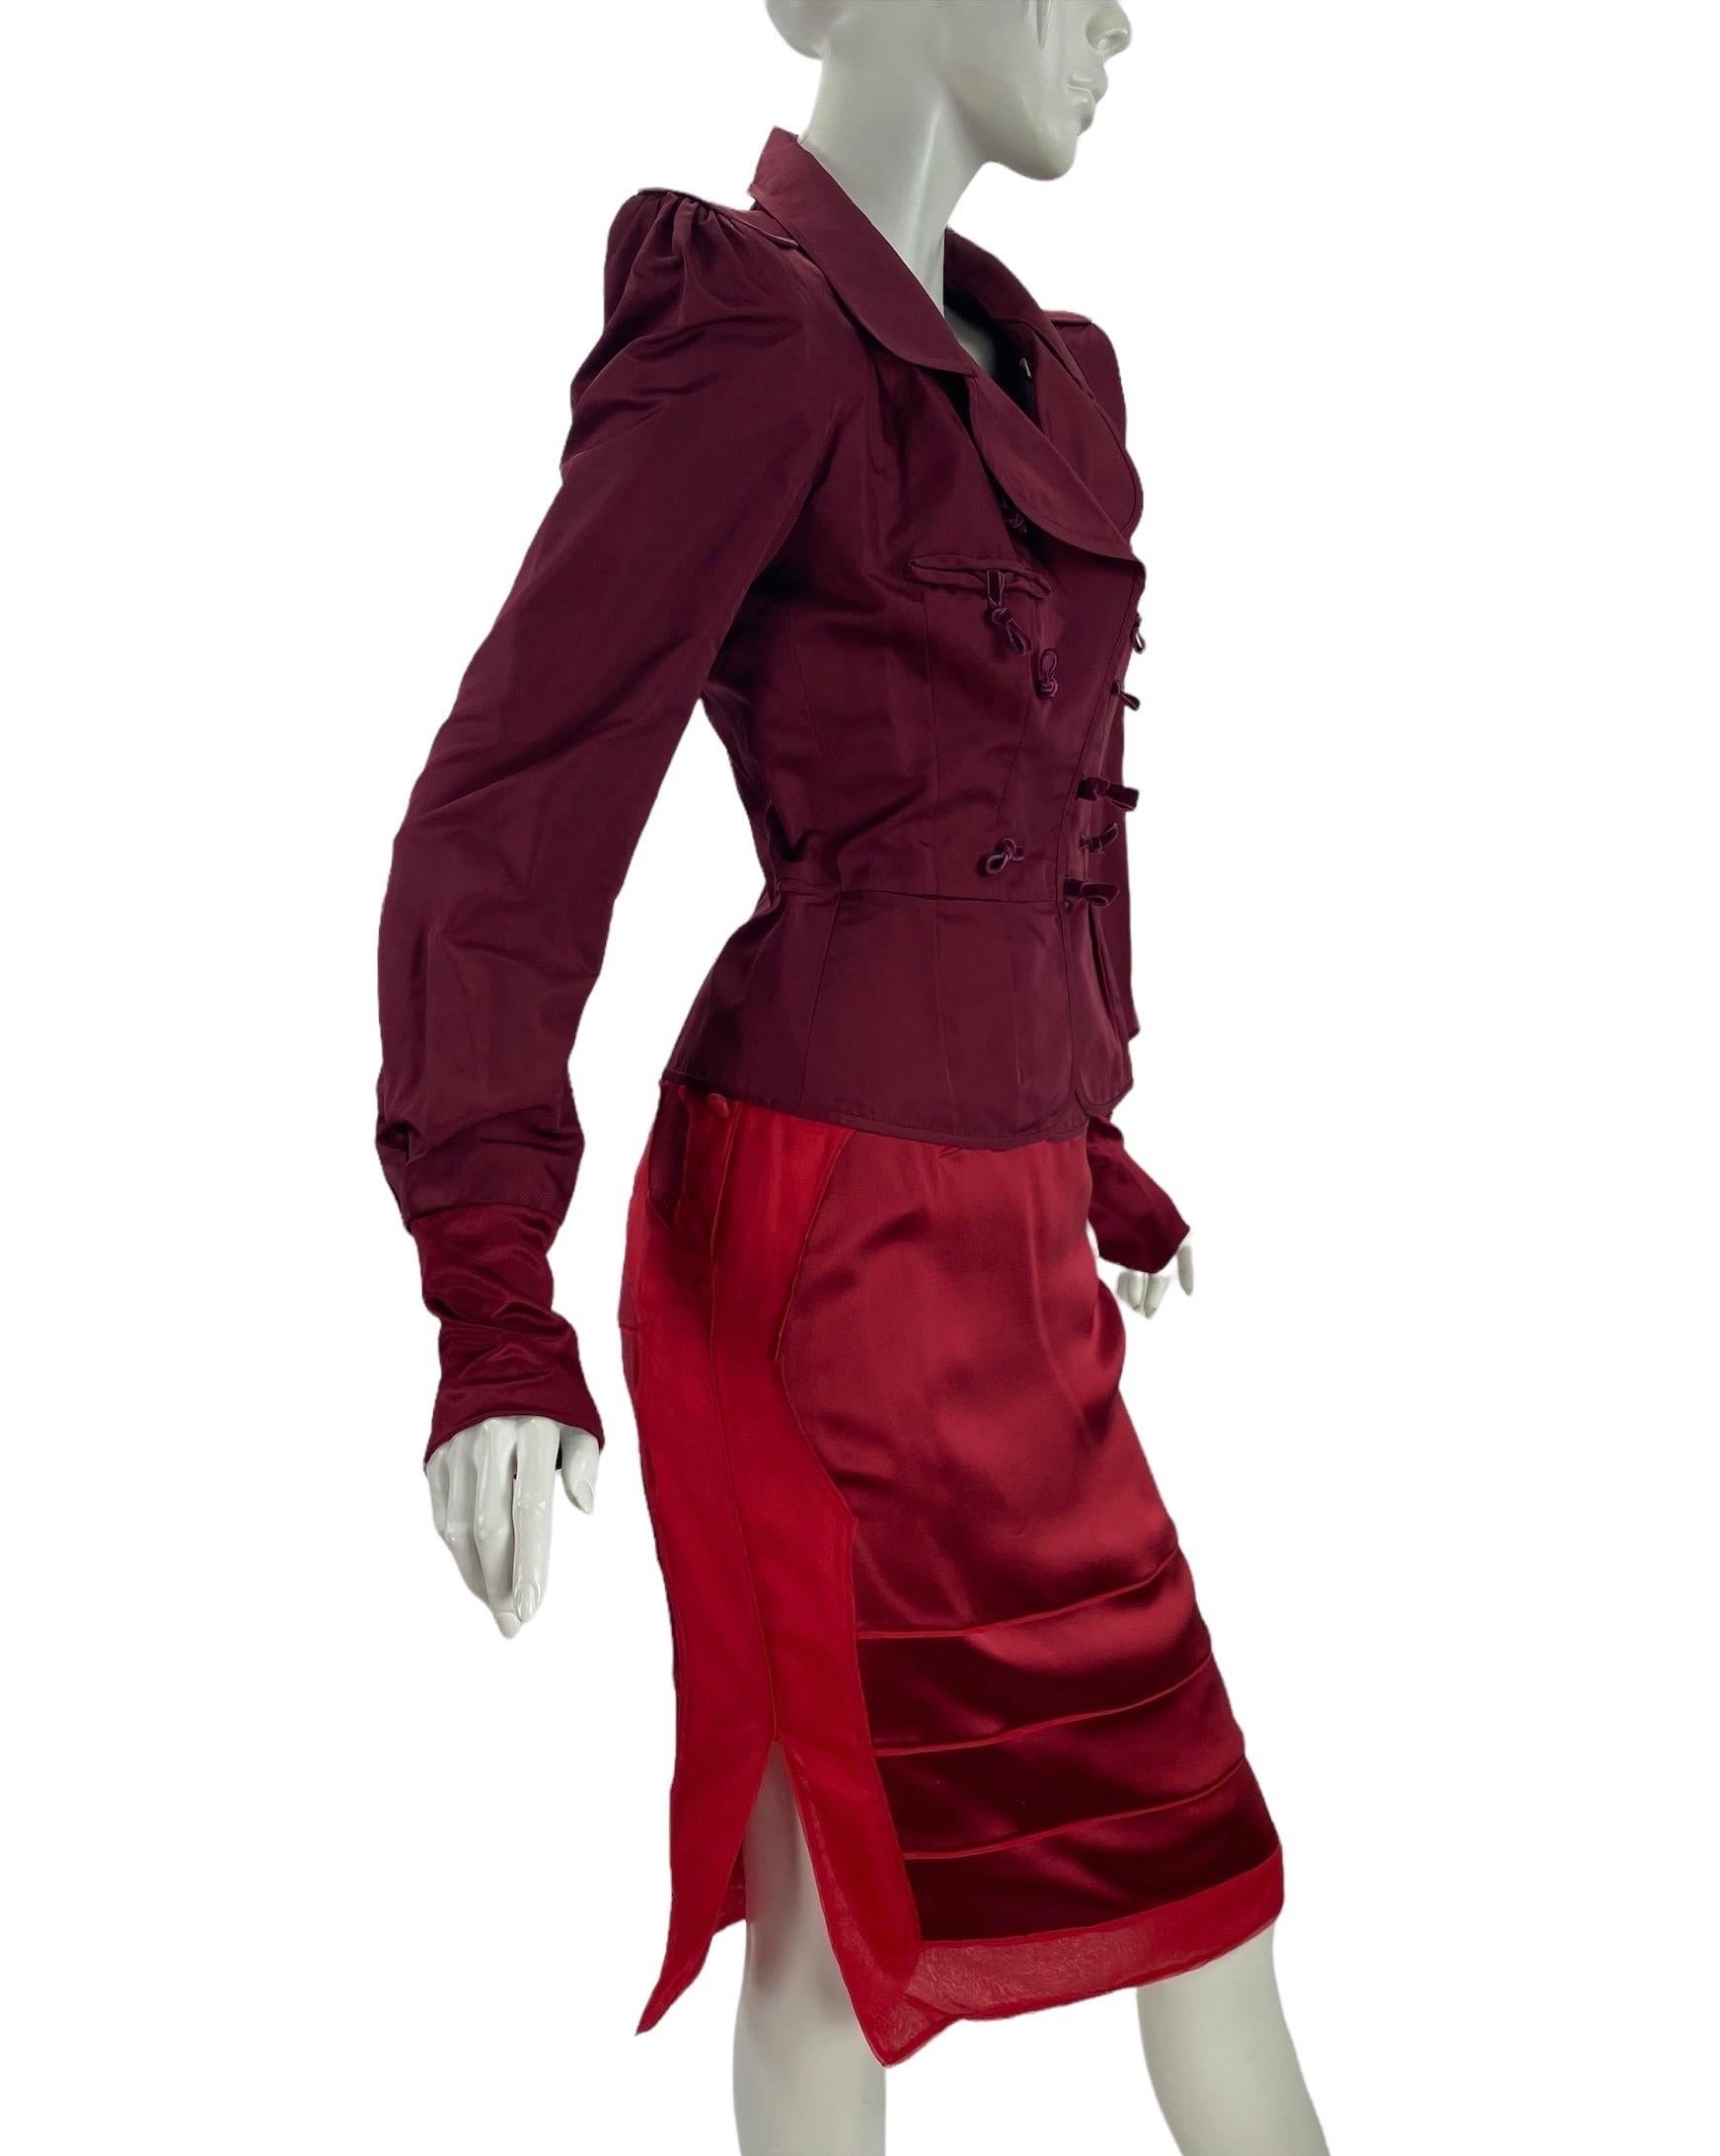 Tom Ford for Yves Saint Laurent Skirt Suit.
F/W 2004 Collection
Country/Region of Manufacture: France
Color:  Burgundy/Red, Material: 100% Silk.
Jacket FR Size 38 - US 6 
Measurements: bust - 36 inches, waist - 28